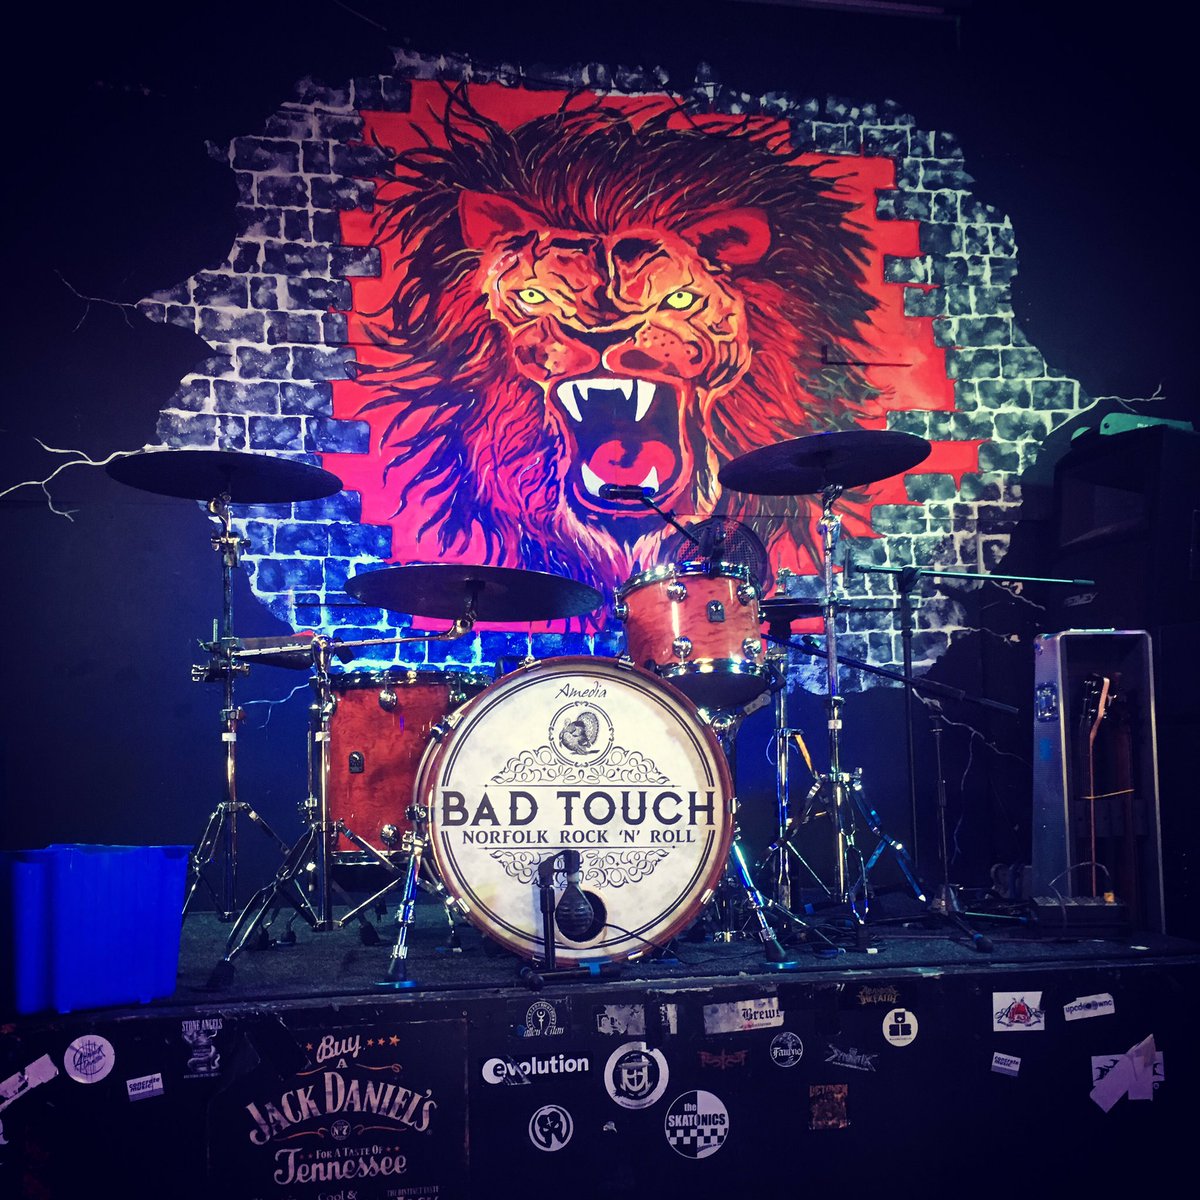 #BadTouch have arrived at #LeosRedLion #Gravesend 🦁🦁 Who’s coming down #tonight? We’ve got #GorillaRiot & #Collateral joining us! DON’T MISS THIS! 🔥🔥🔥 #Stage #lion #RedLionGravesEnd #LeosRedLionGravesend #band #gig #gignight #livemusic #newmusic #music #TGIF #Natal #Drums